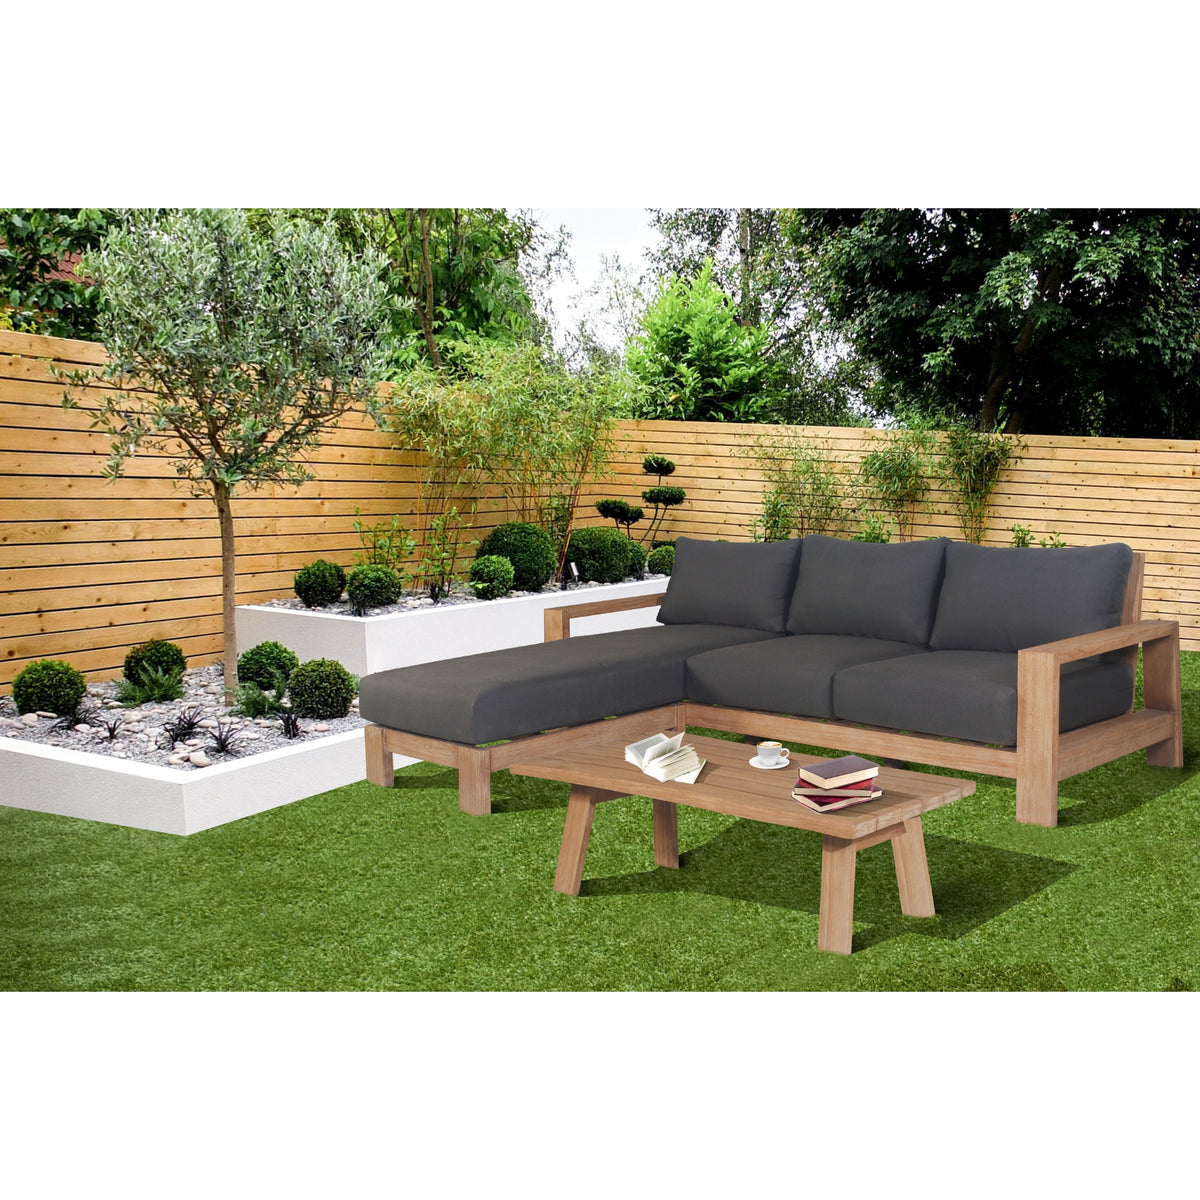 Stud 3 Seater Outdoor Patio Reversible Chaise Sofa Lounge Eucalyptus Solid Wood